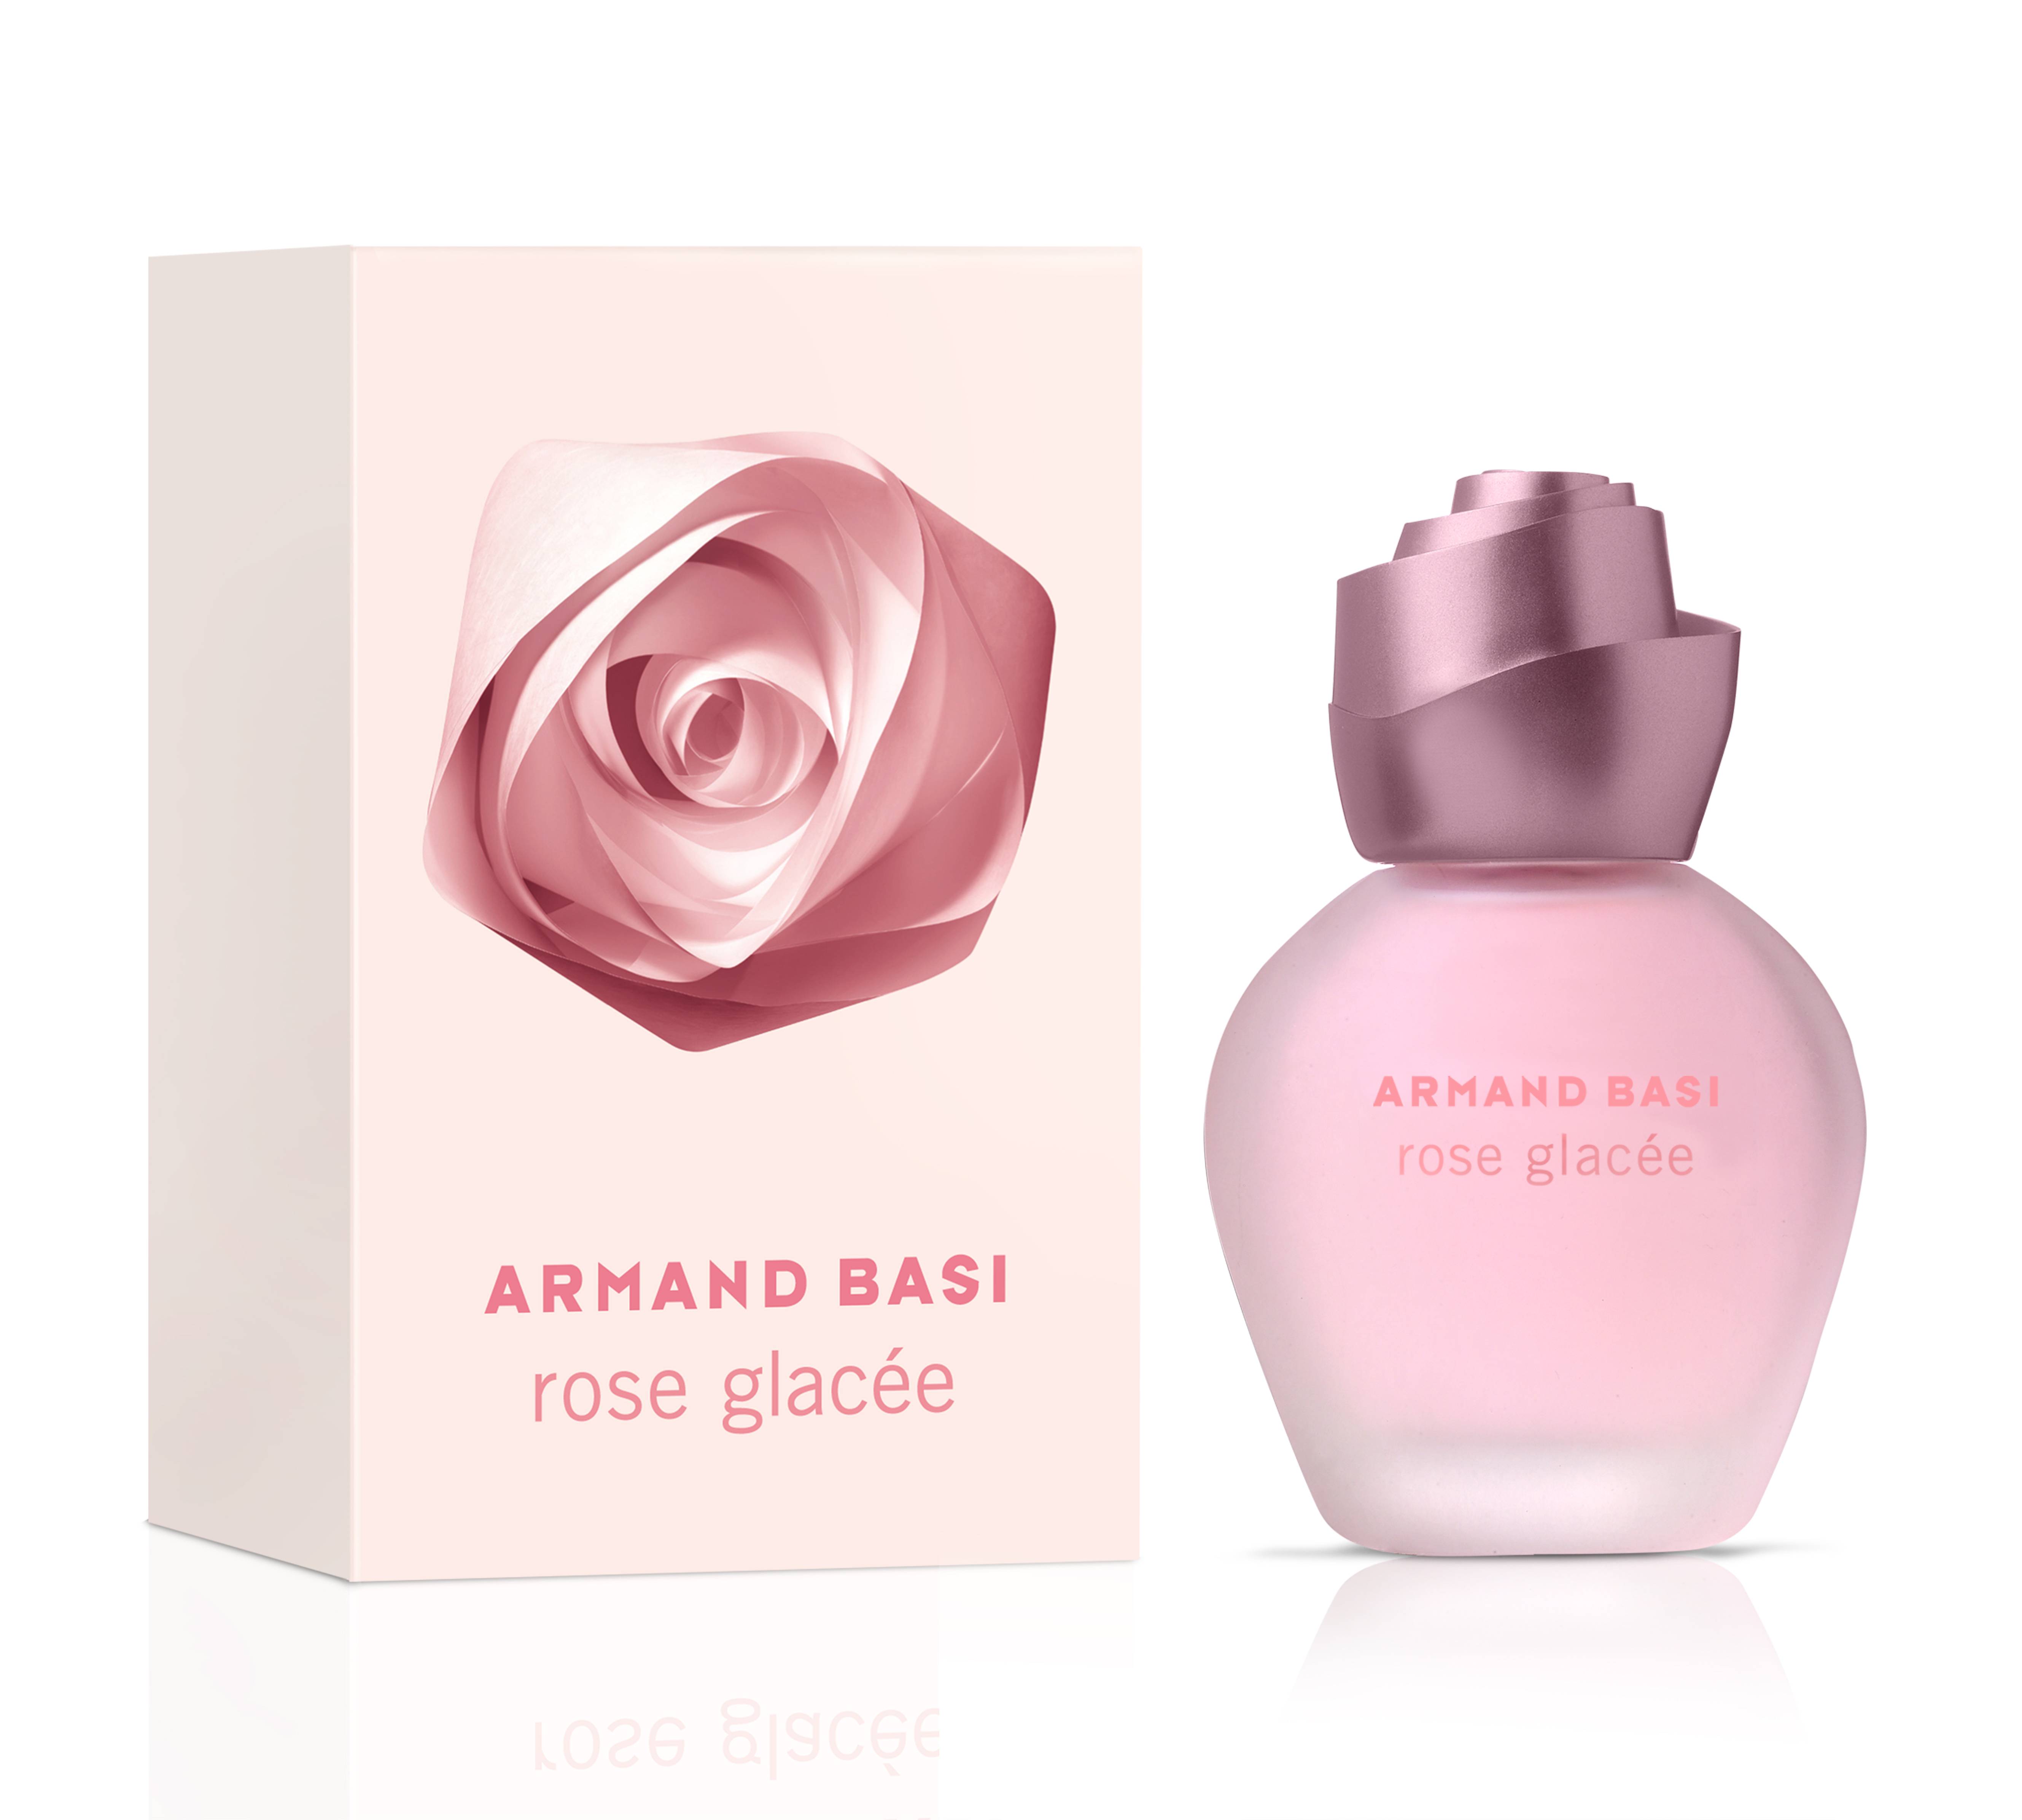 Armand Basi_Rose Glacee_100ml_Bottle & Pack_245 AED